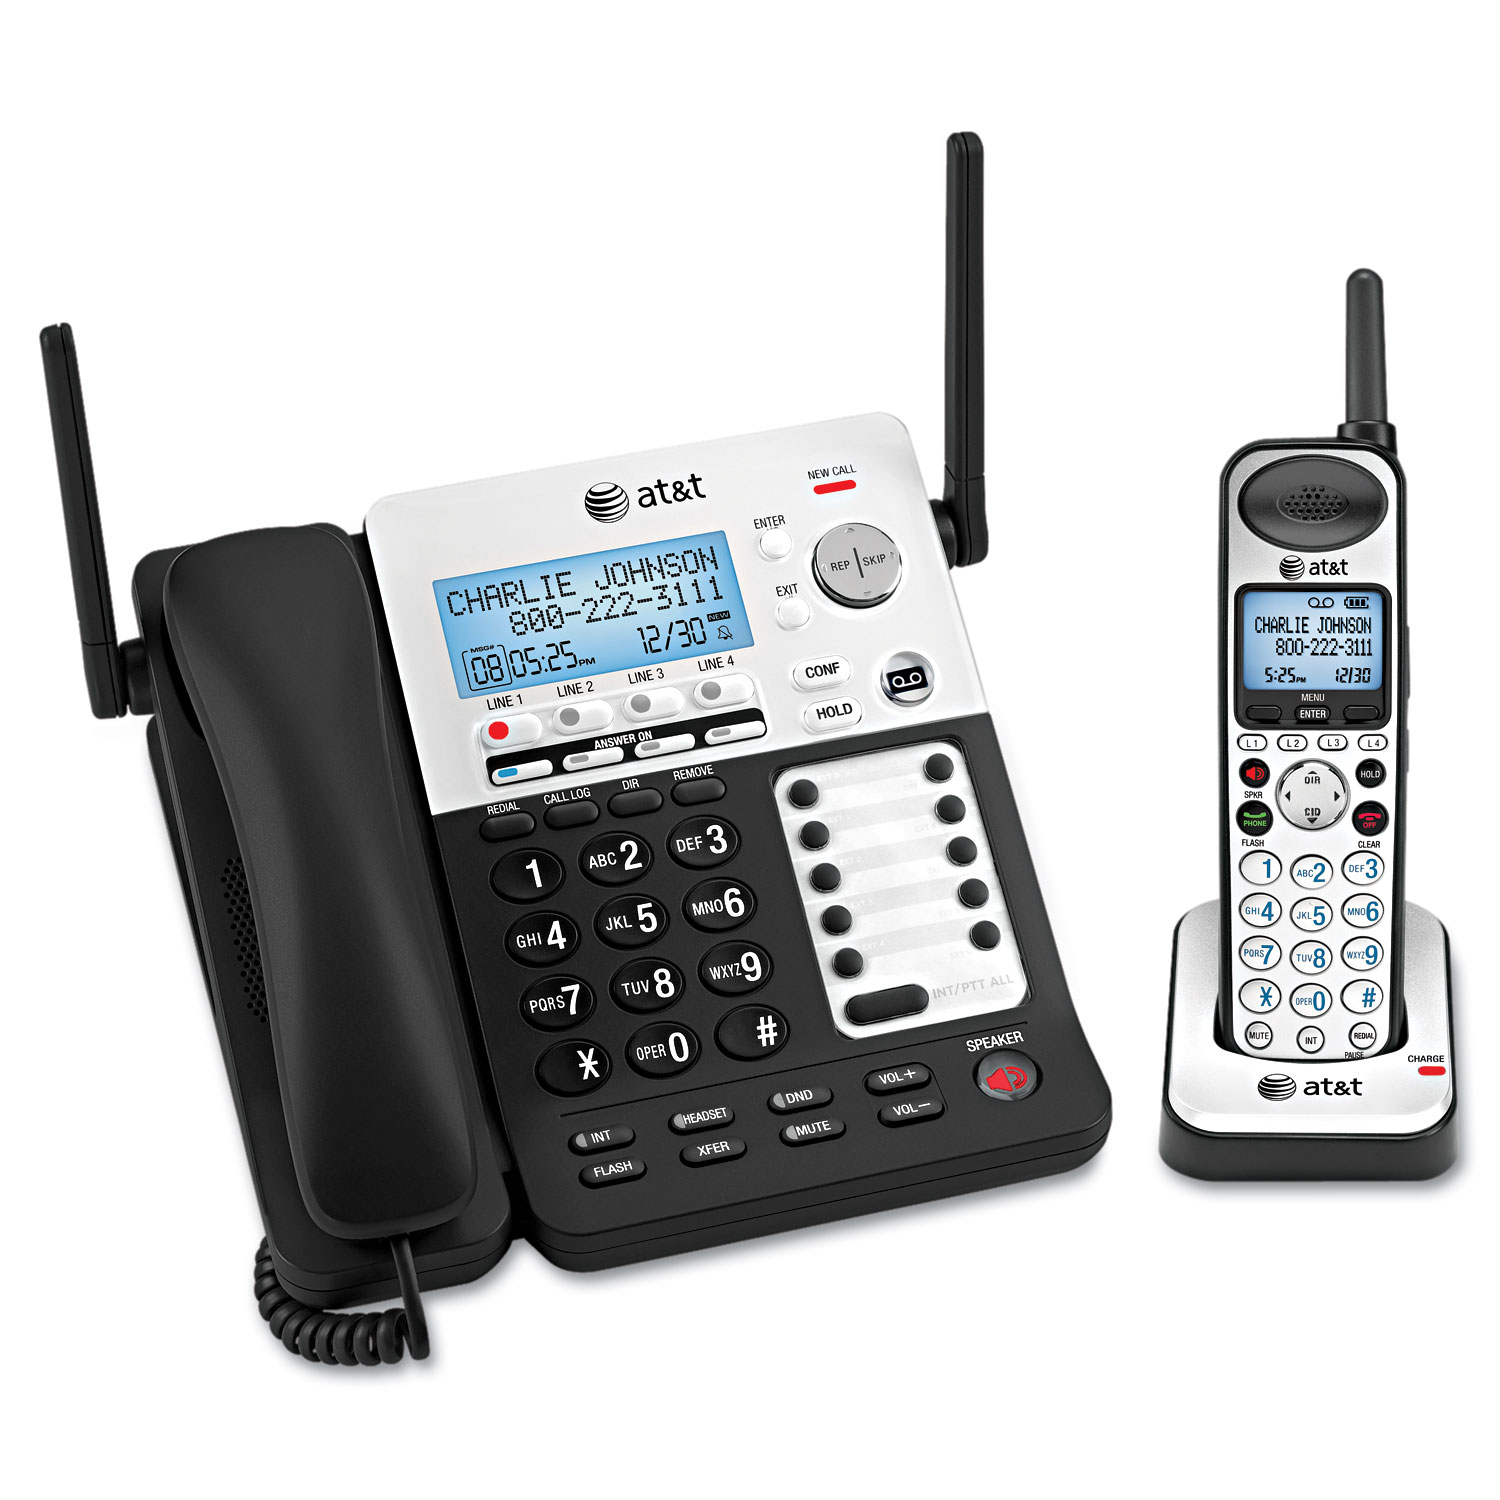  AT&T SB67138 SB67138 DECT 6.0 Phone/Answering System, 4 Line, 1 Corded/1 Cordless Handset (ATTSB67138) 